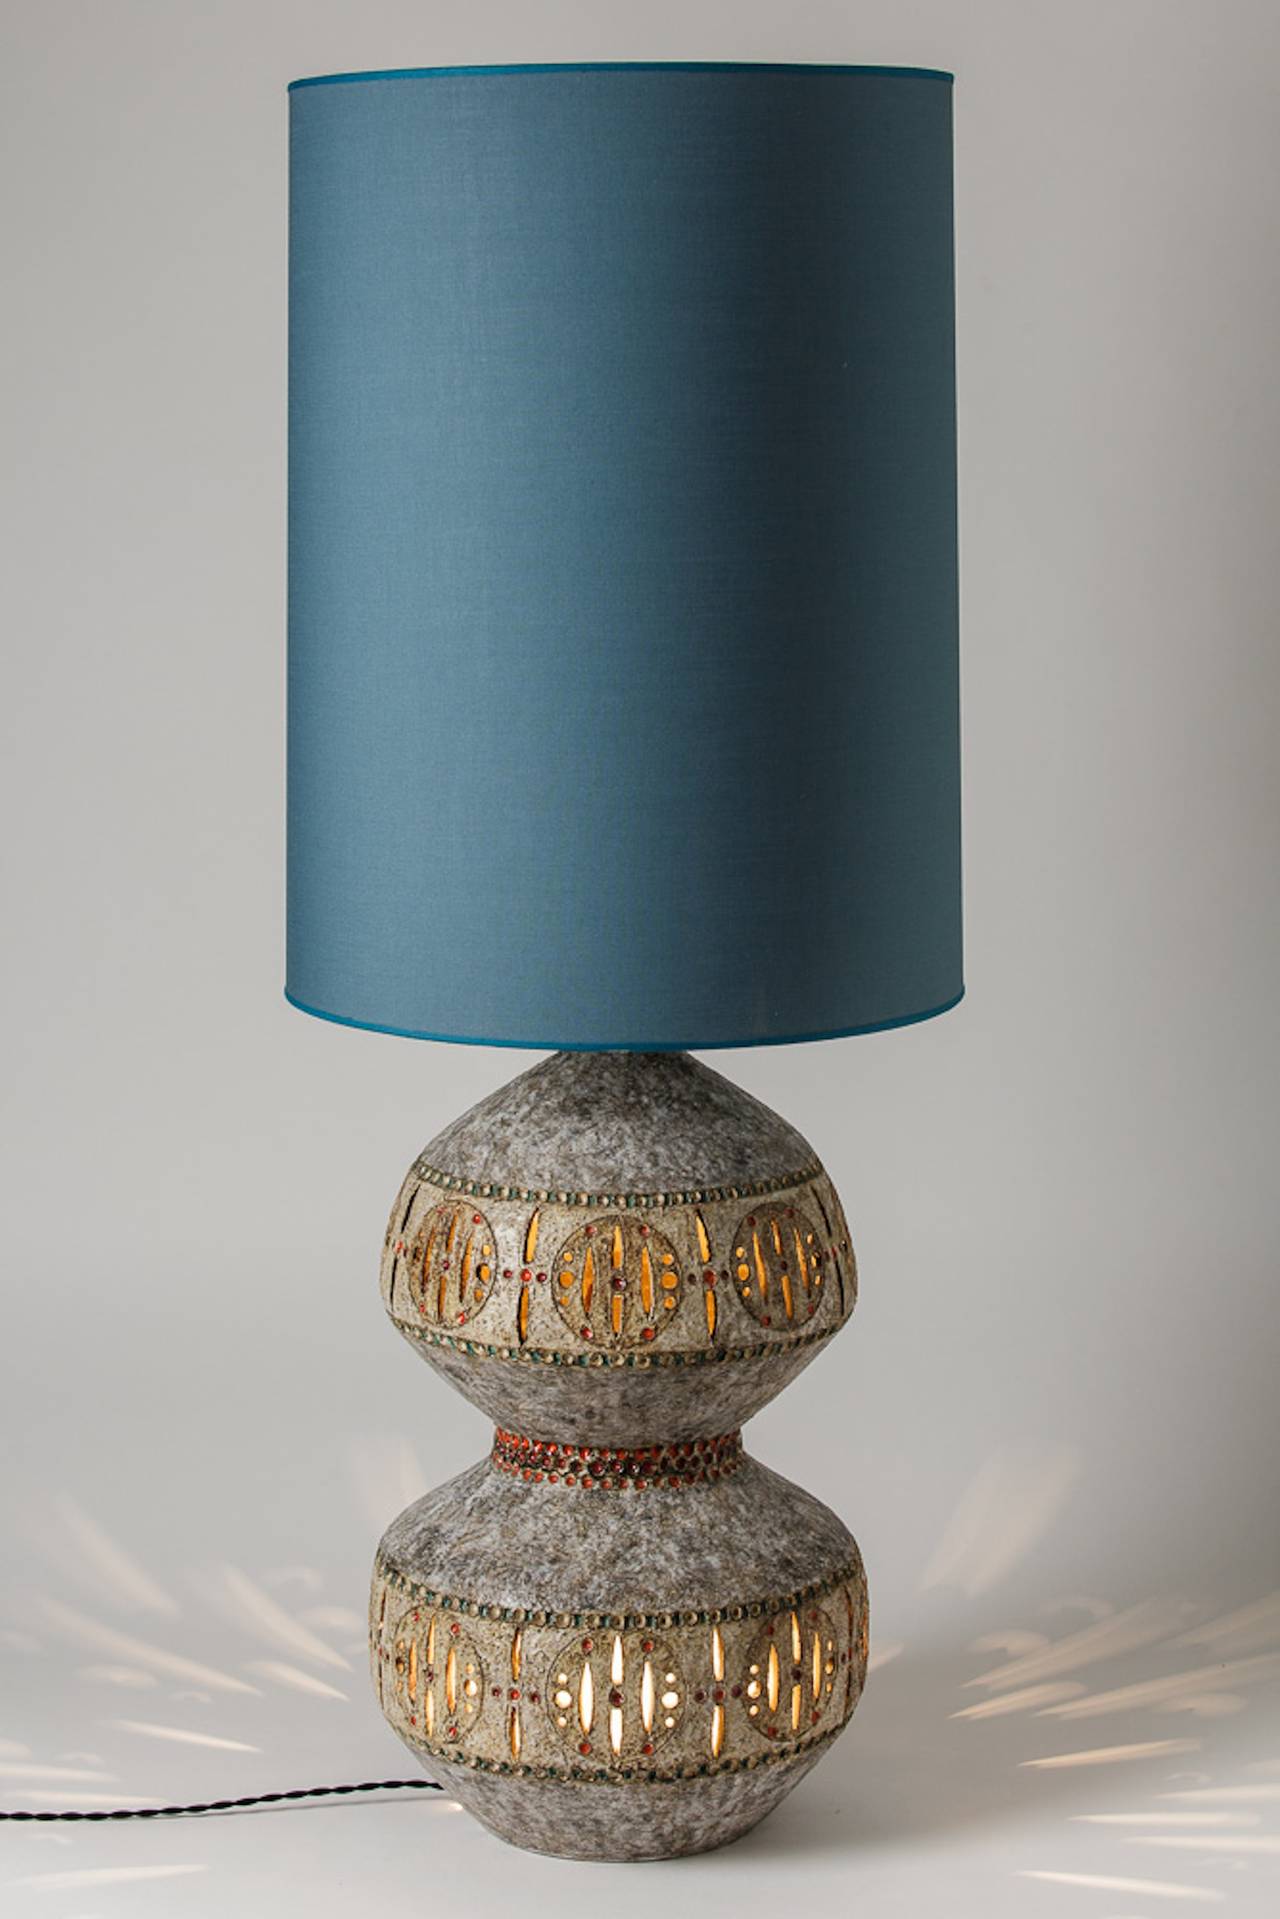 Beaux Arts Extraordinary and Important Ceramic Lamp by Raphaël Giarrusso, Vallauris